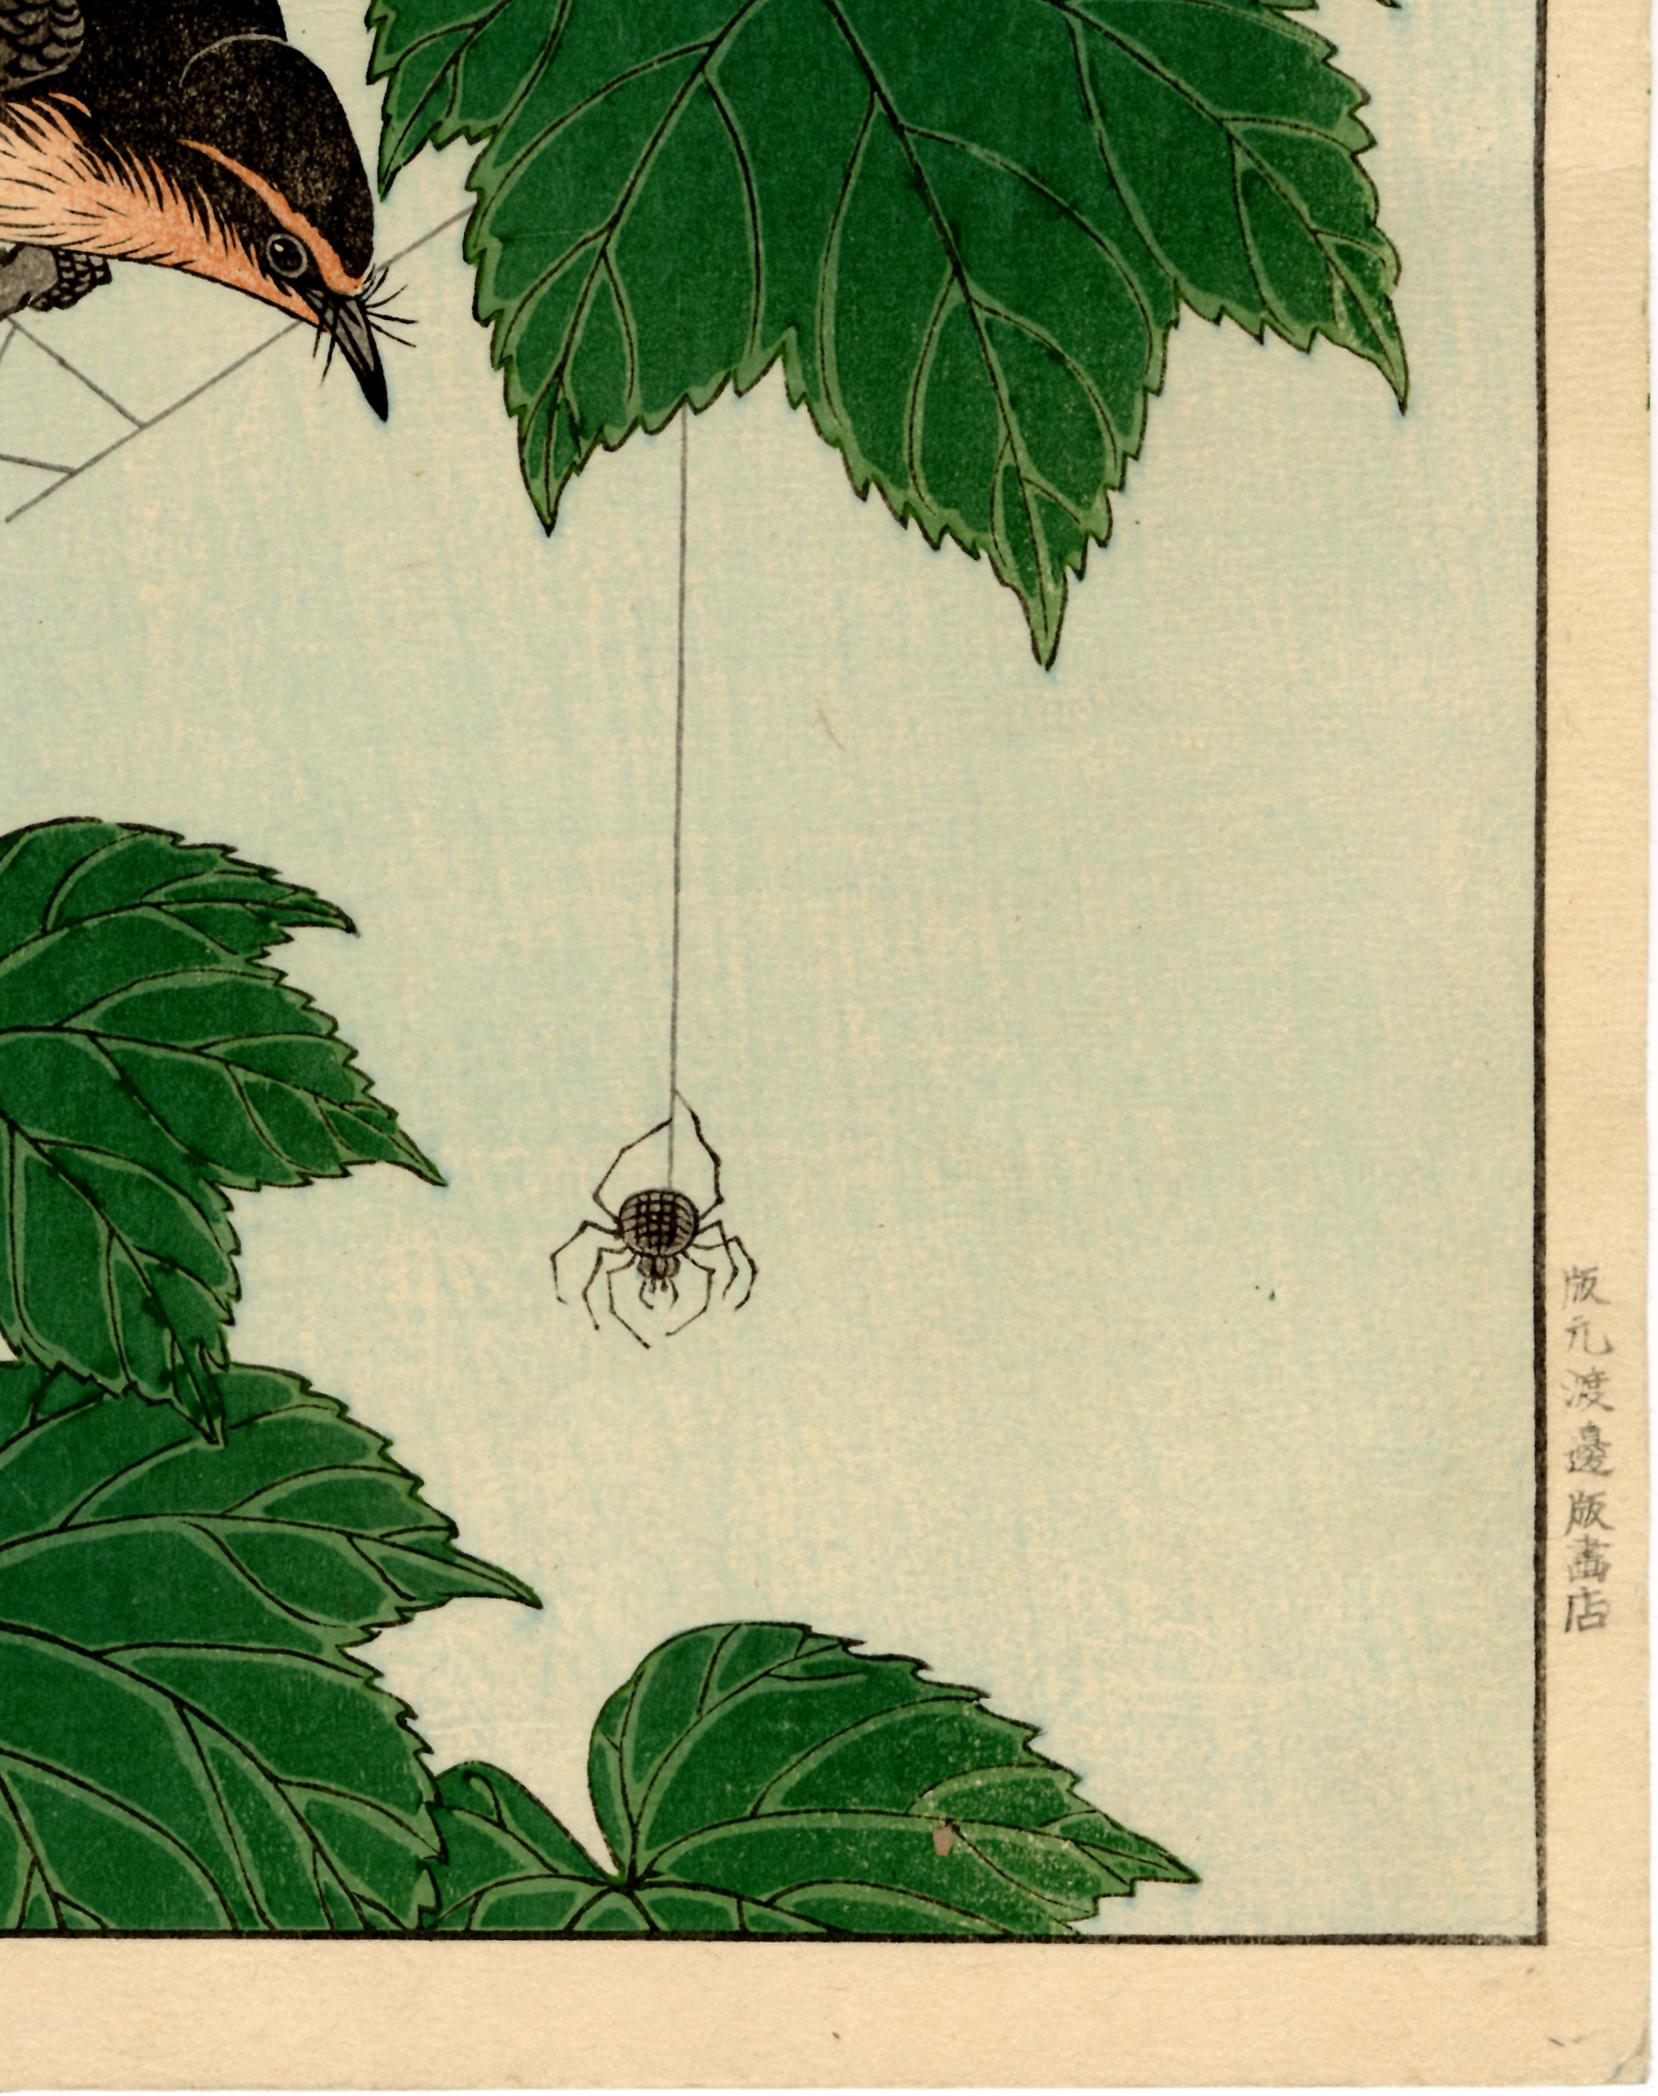 An orange-and black flycatcher has perched on a rose mallow branch. The bird watches a spider descending on its filament with great interest. With the Watanabe seal that was in use during the early 1930s, right margin. Published by Watanabe